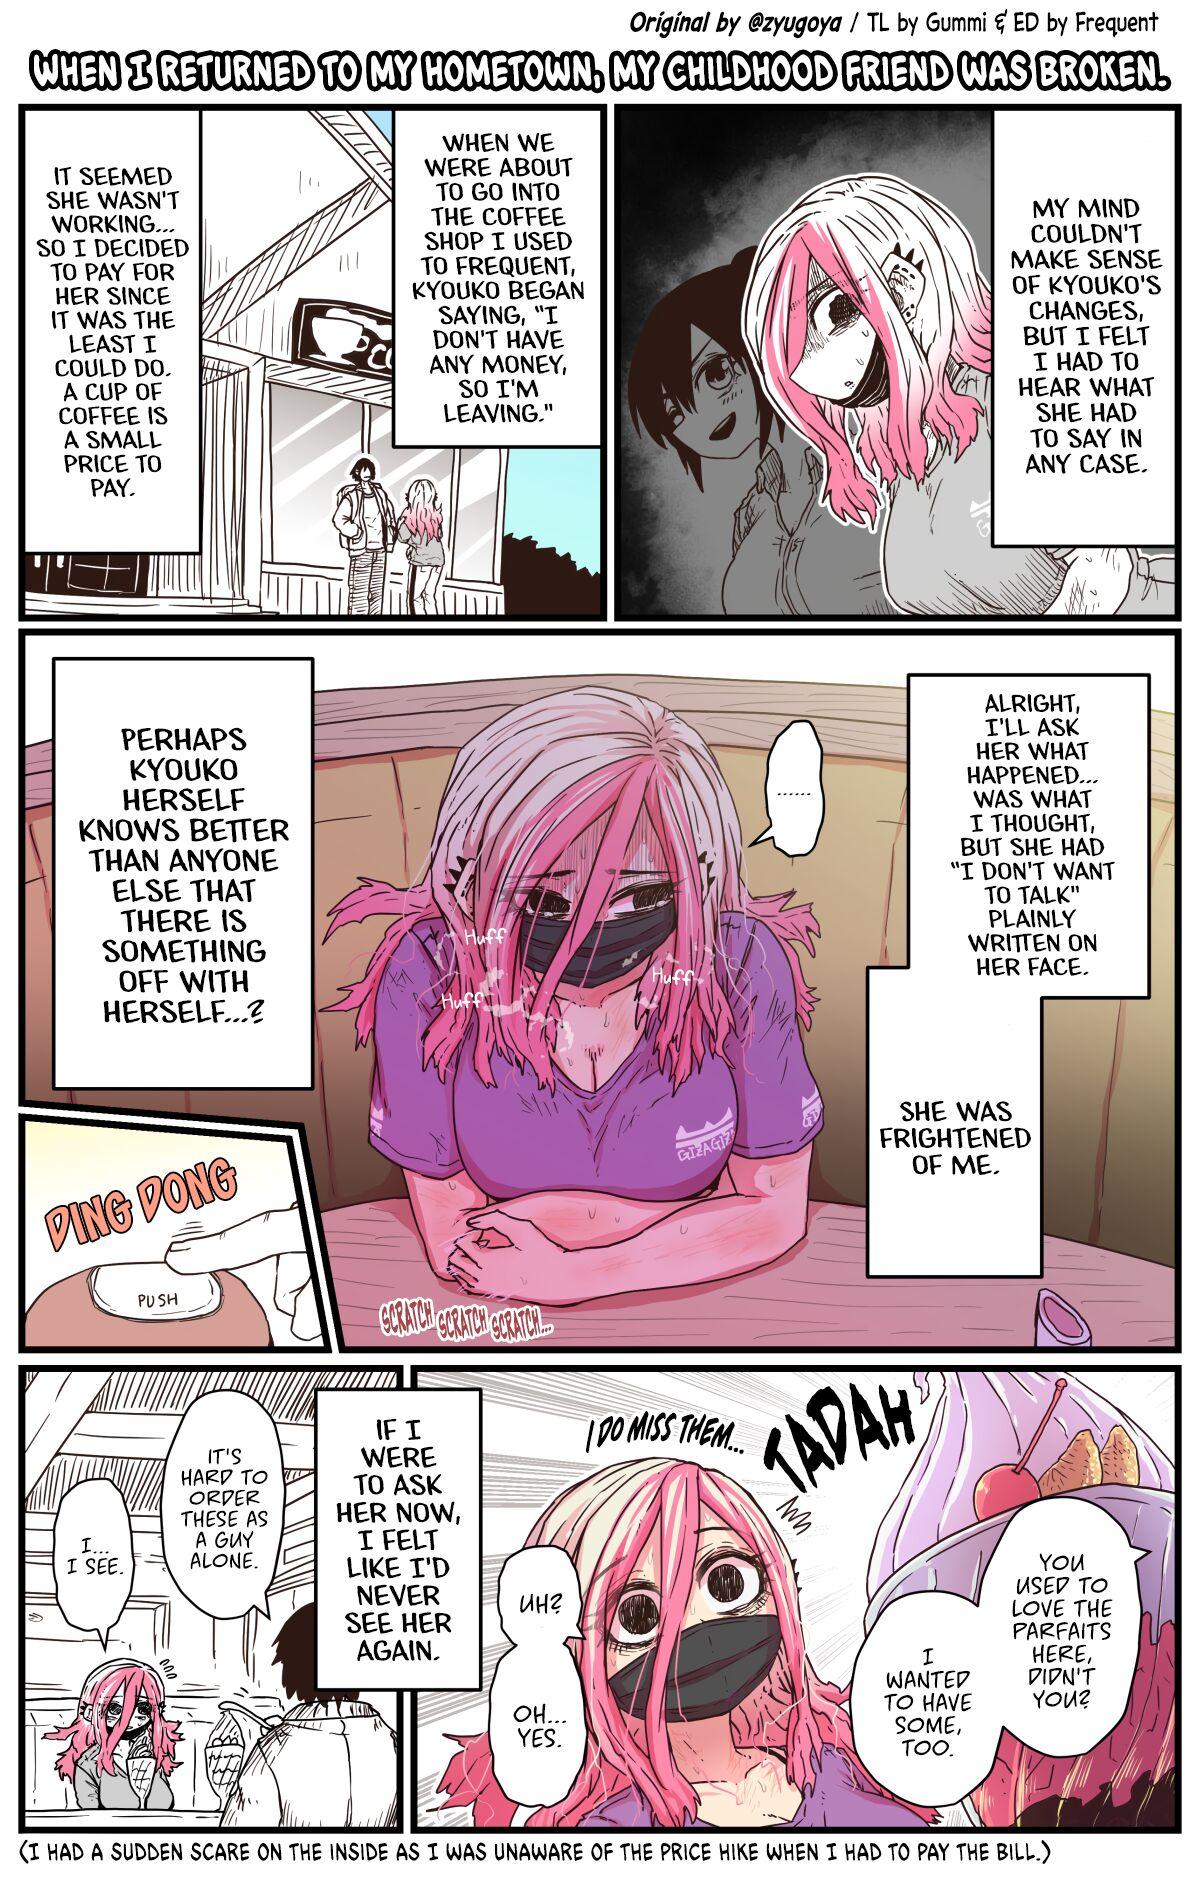 Cowgirl When I Returned to My Hometown, My Childhood Friend was Broken - Original Highschool - Page 2